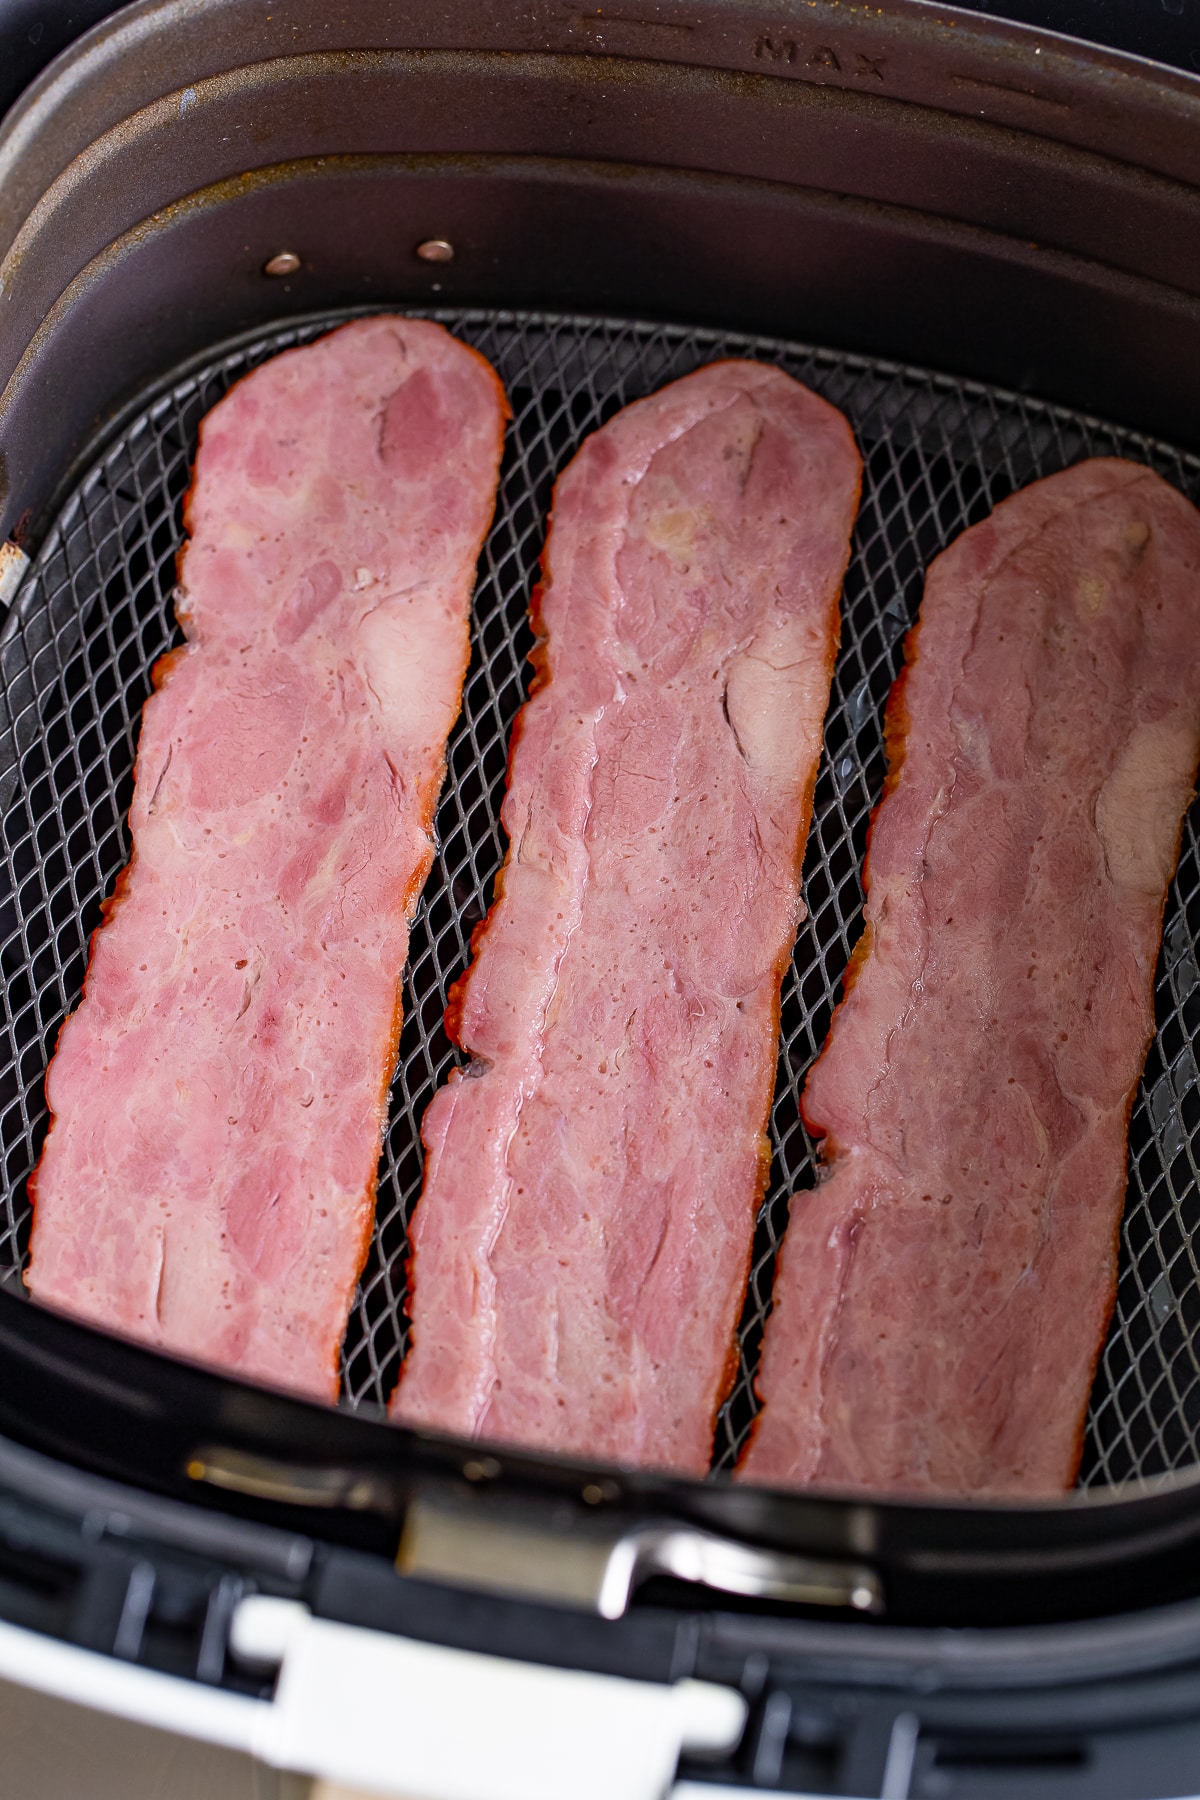 slices of turkey bacon uncooked in an air fryer basket